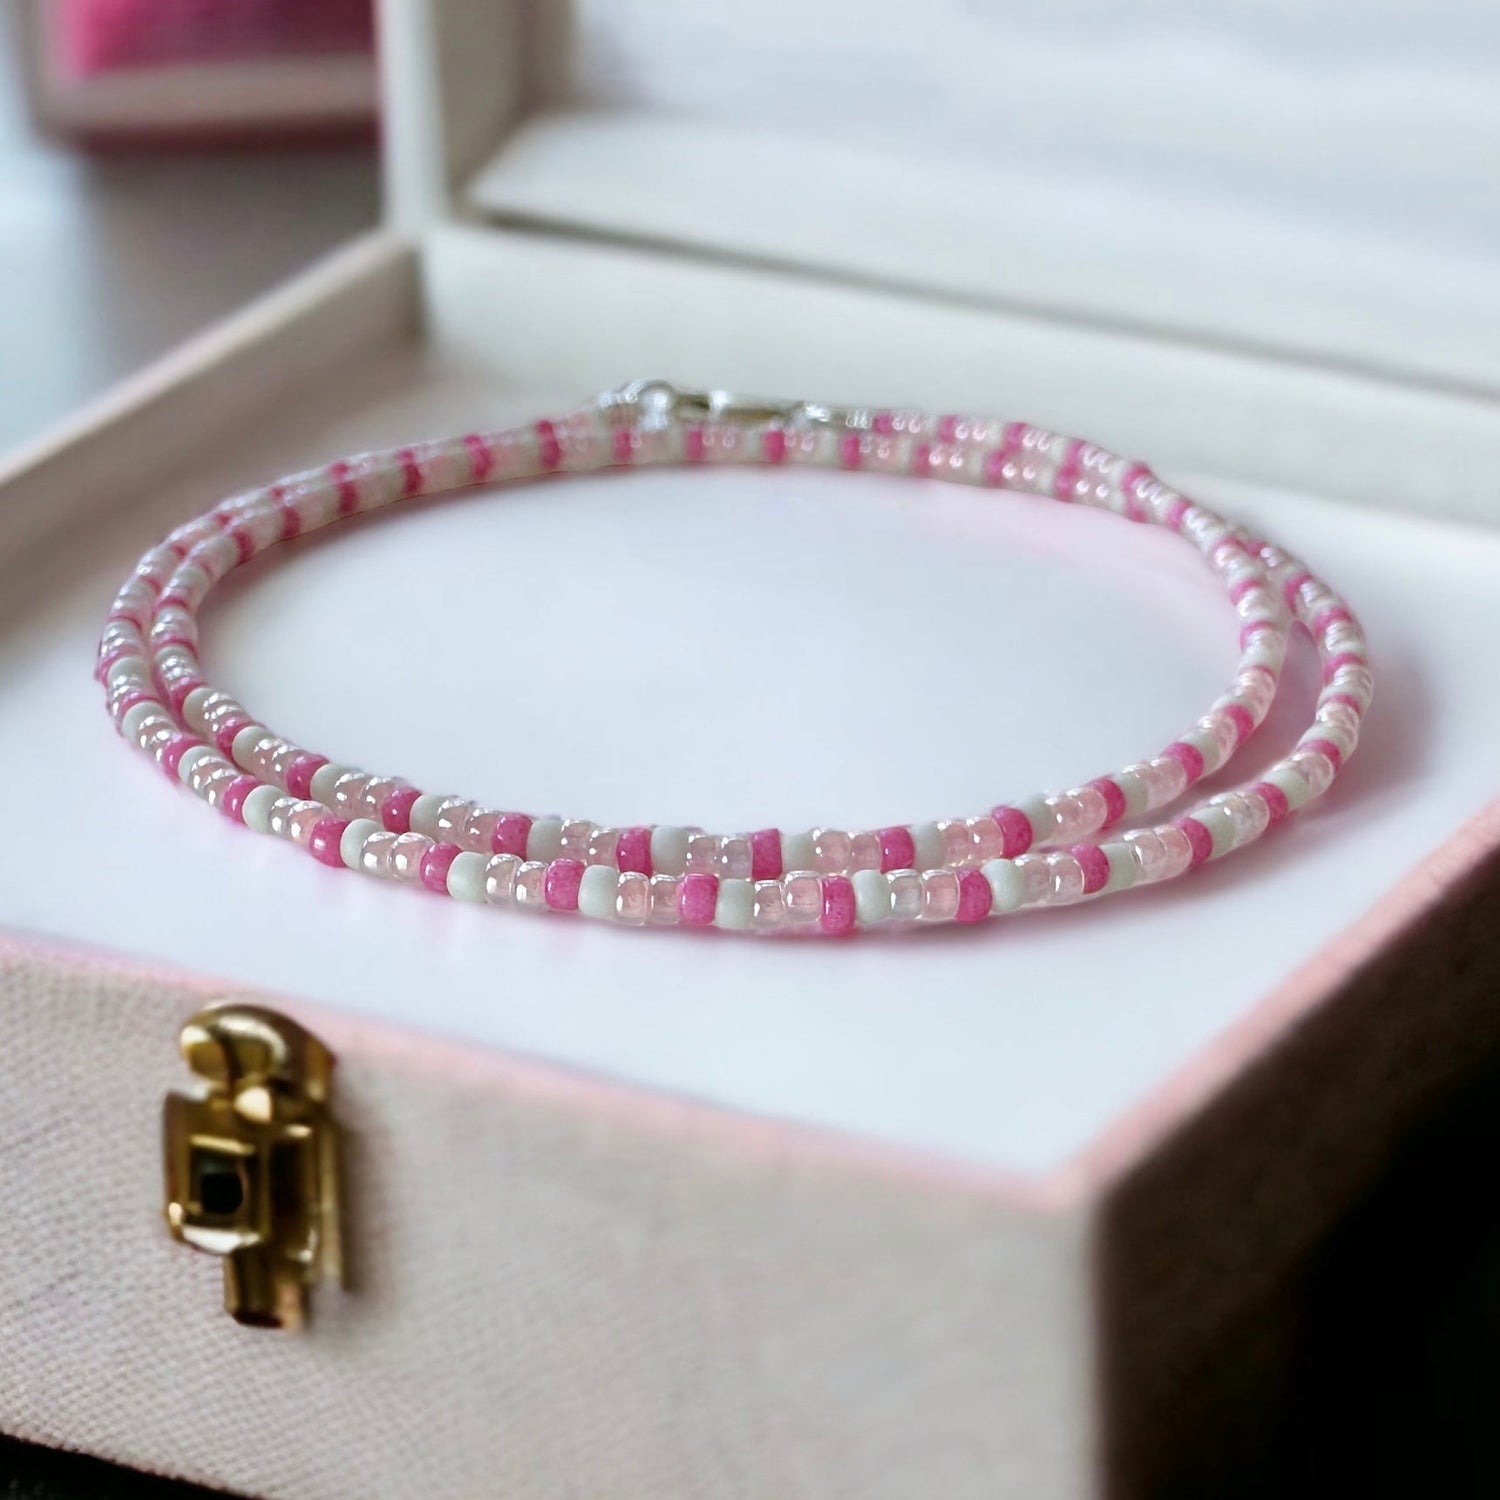 A dainty seed bead necklace made with pink and cream 11/0 Miyuki seed beads placed neatly in a pink jewelry box